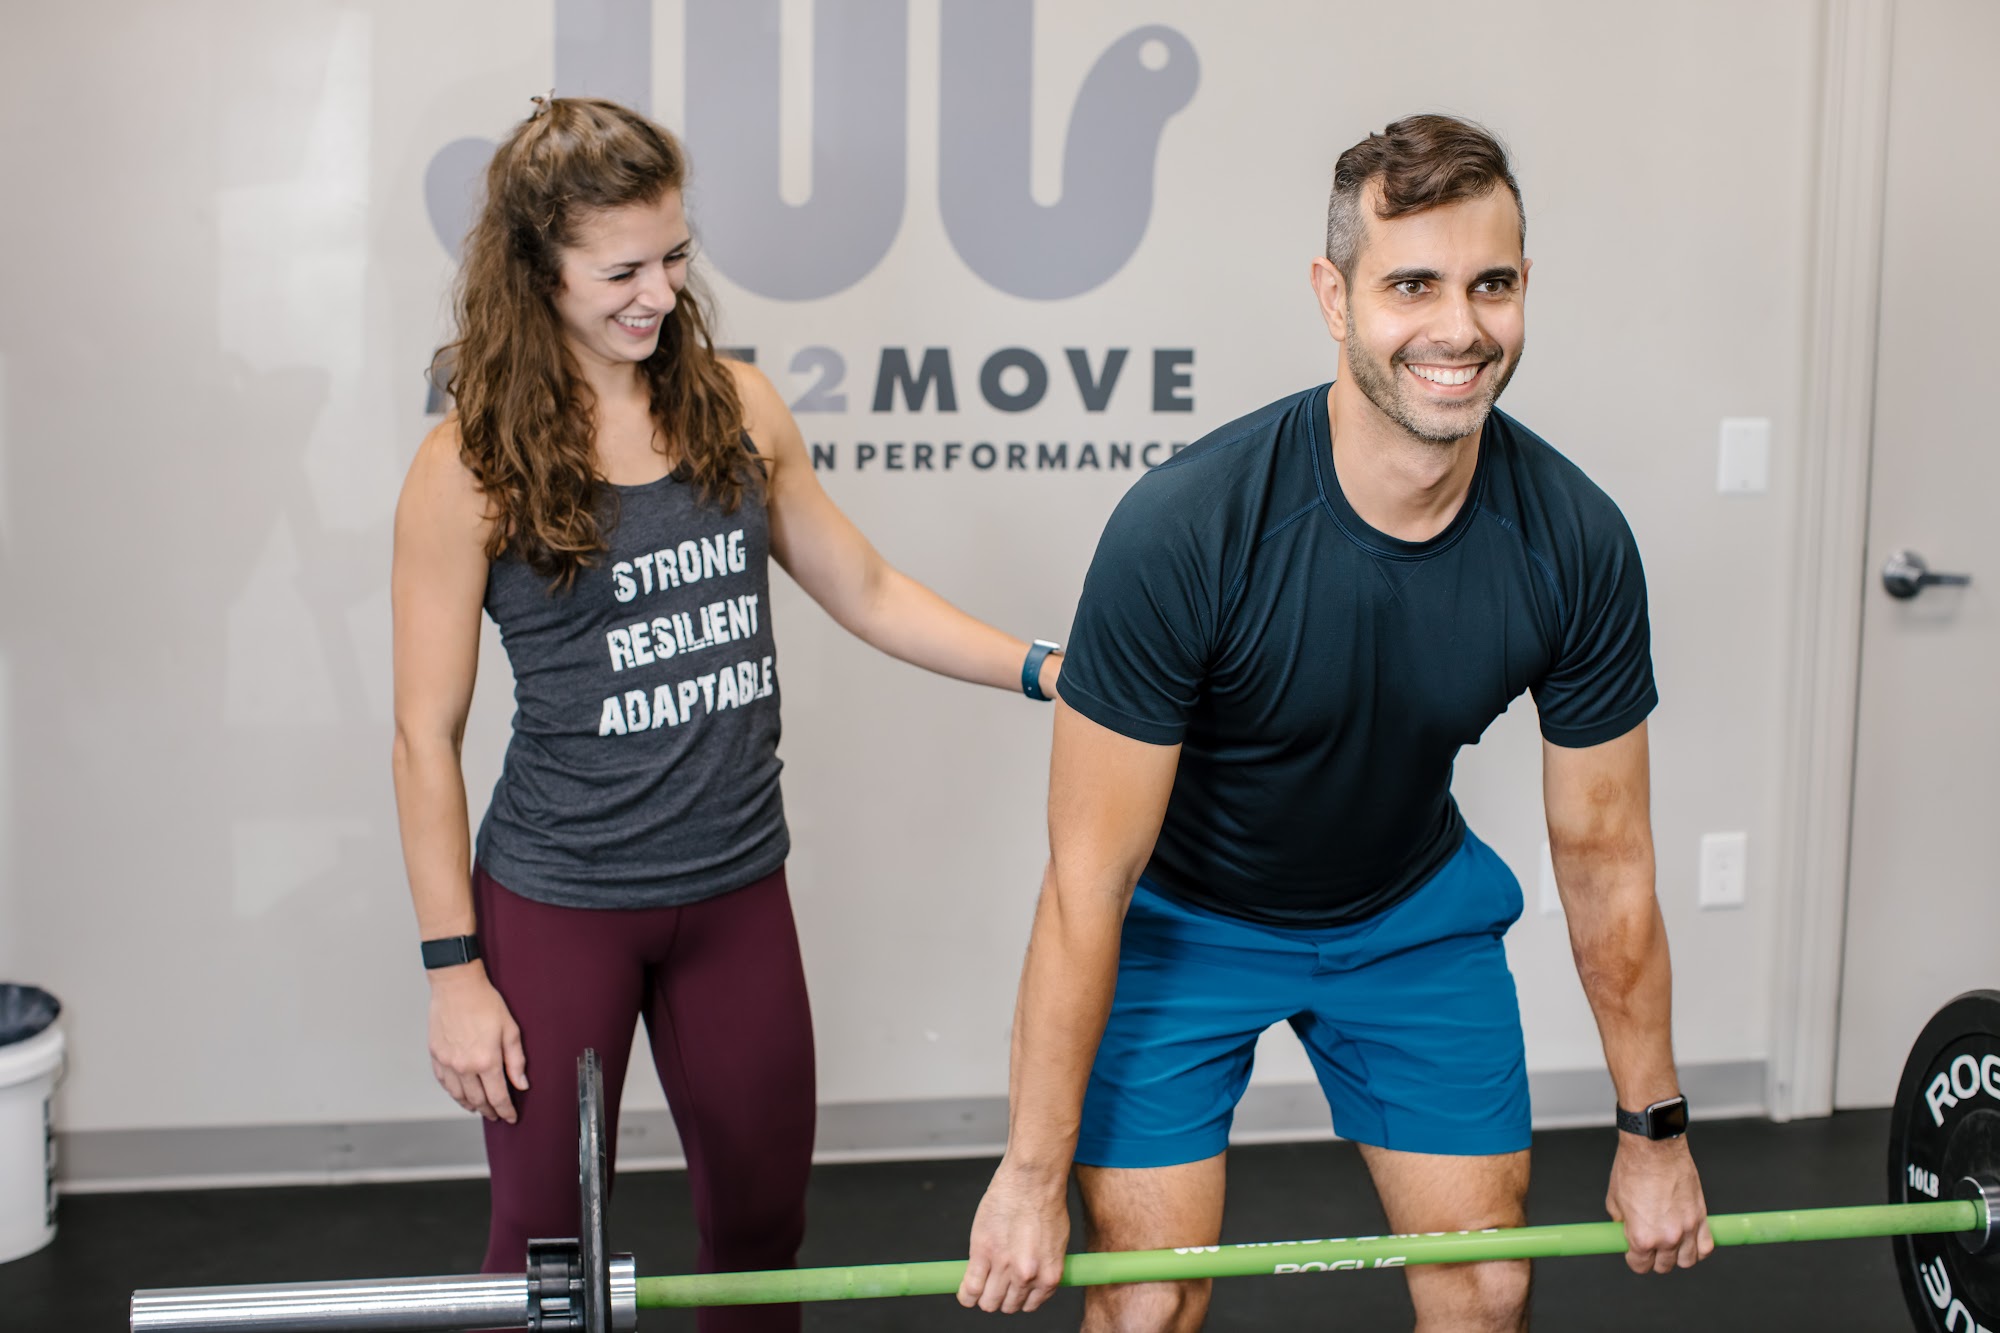 Made 2 Move Physical Therapy - Downtown Charleston